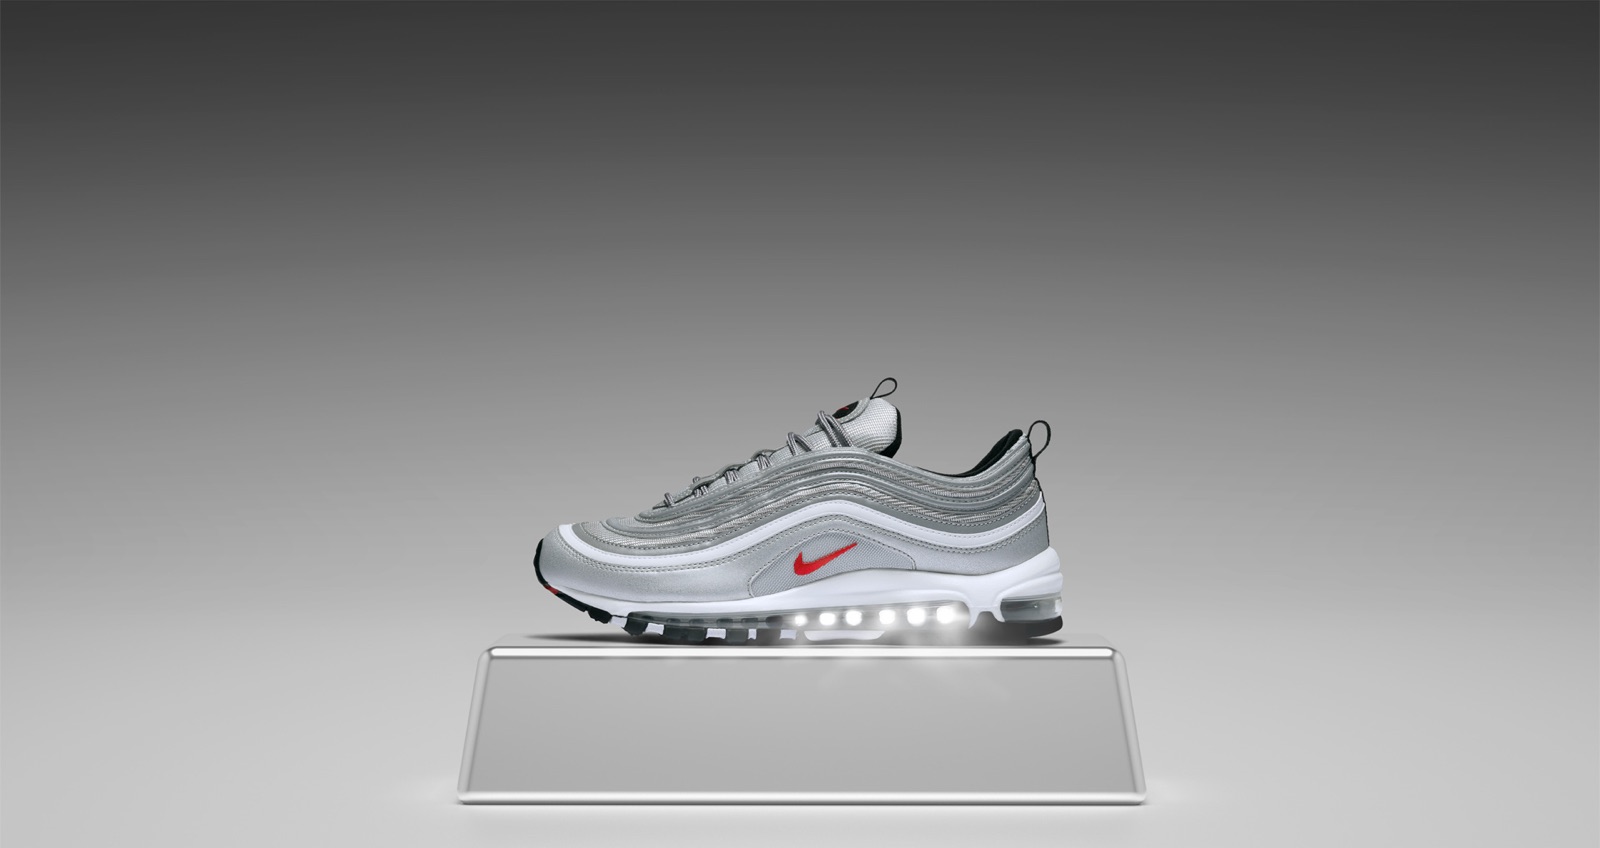 The Nike Air Max 'Silver Bullet' Pack 